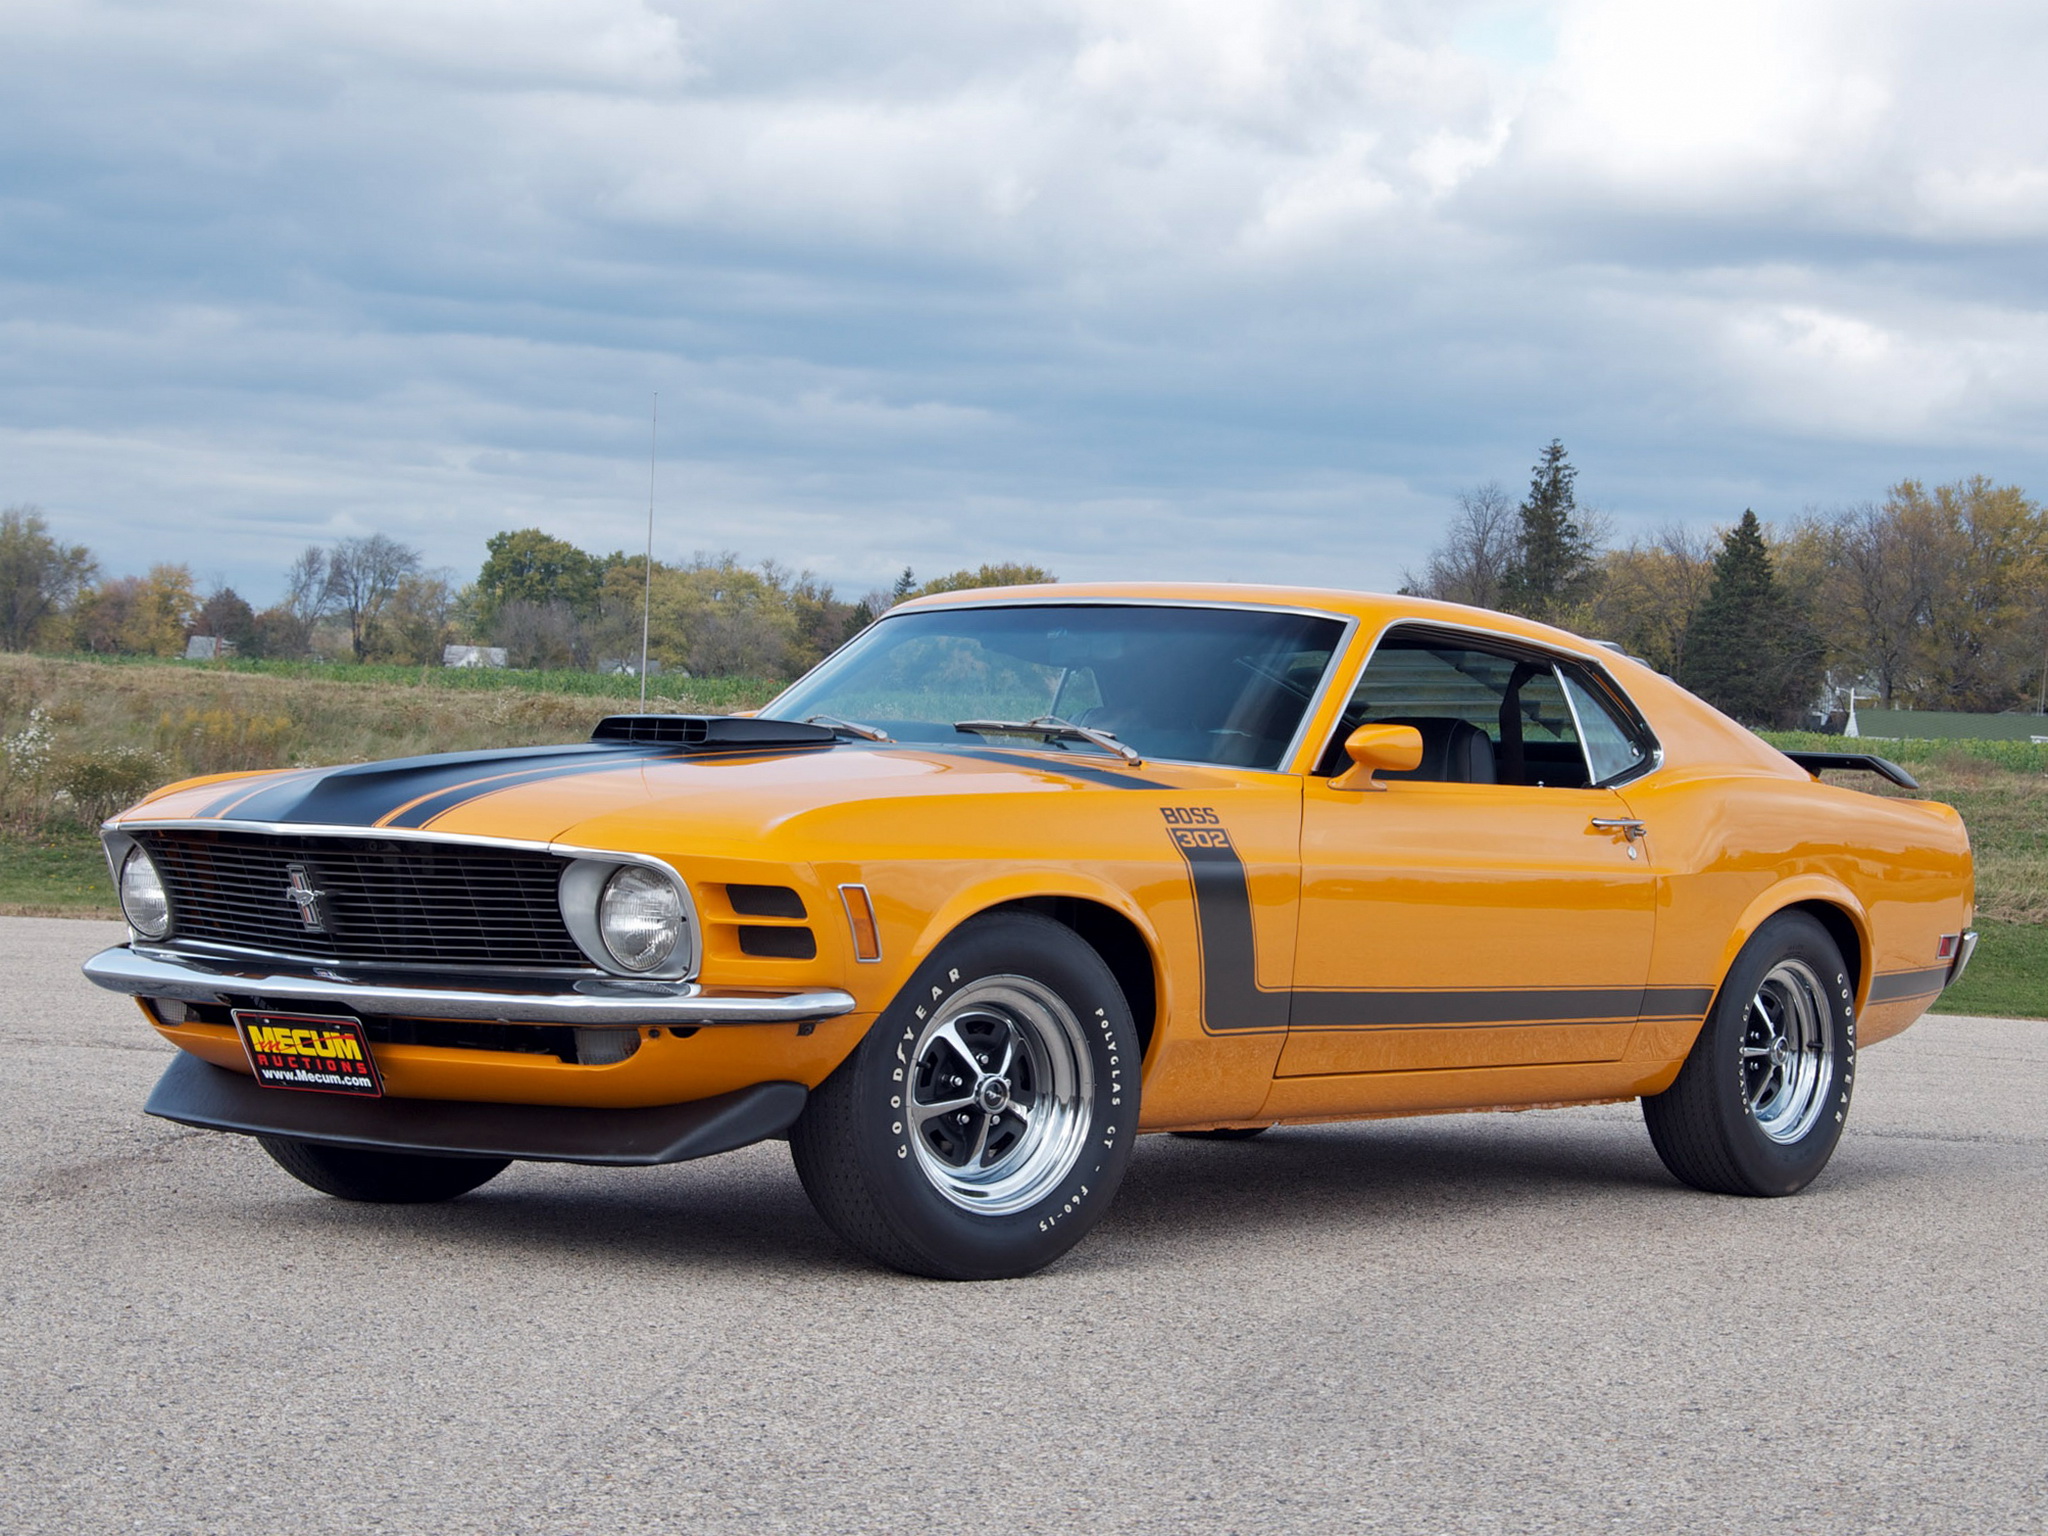 Ford Mustang Boss 302 1970 - image